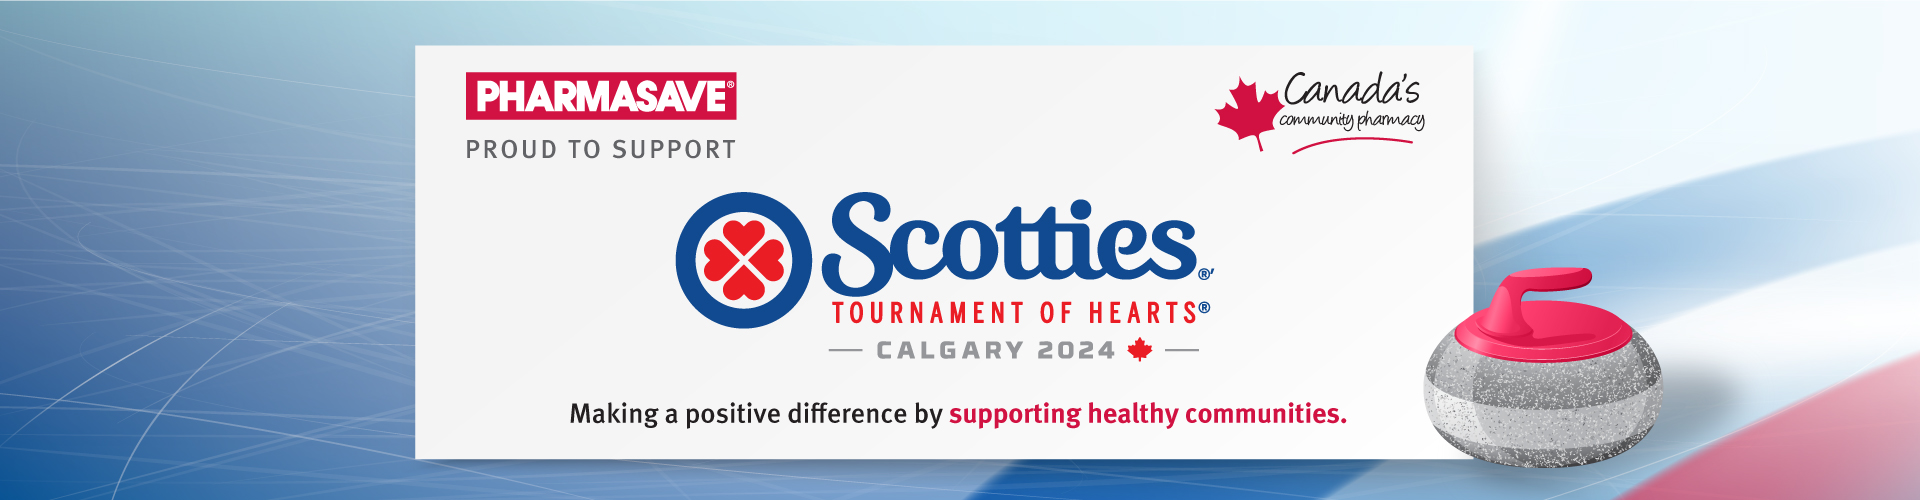 Pharmasave is proud to support the Scotties Tournament of Hearts happening in Calgary.